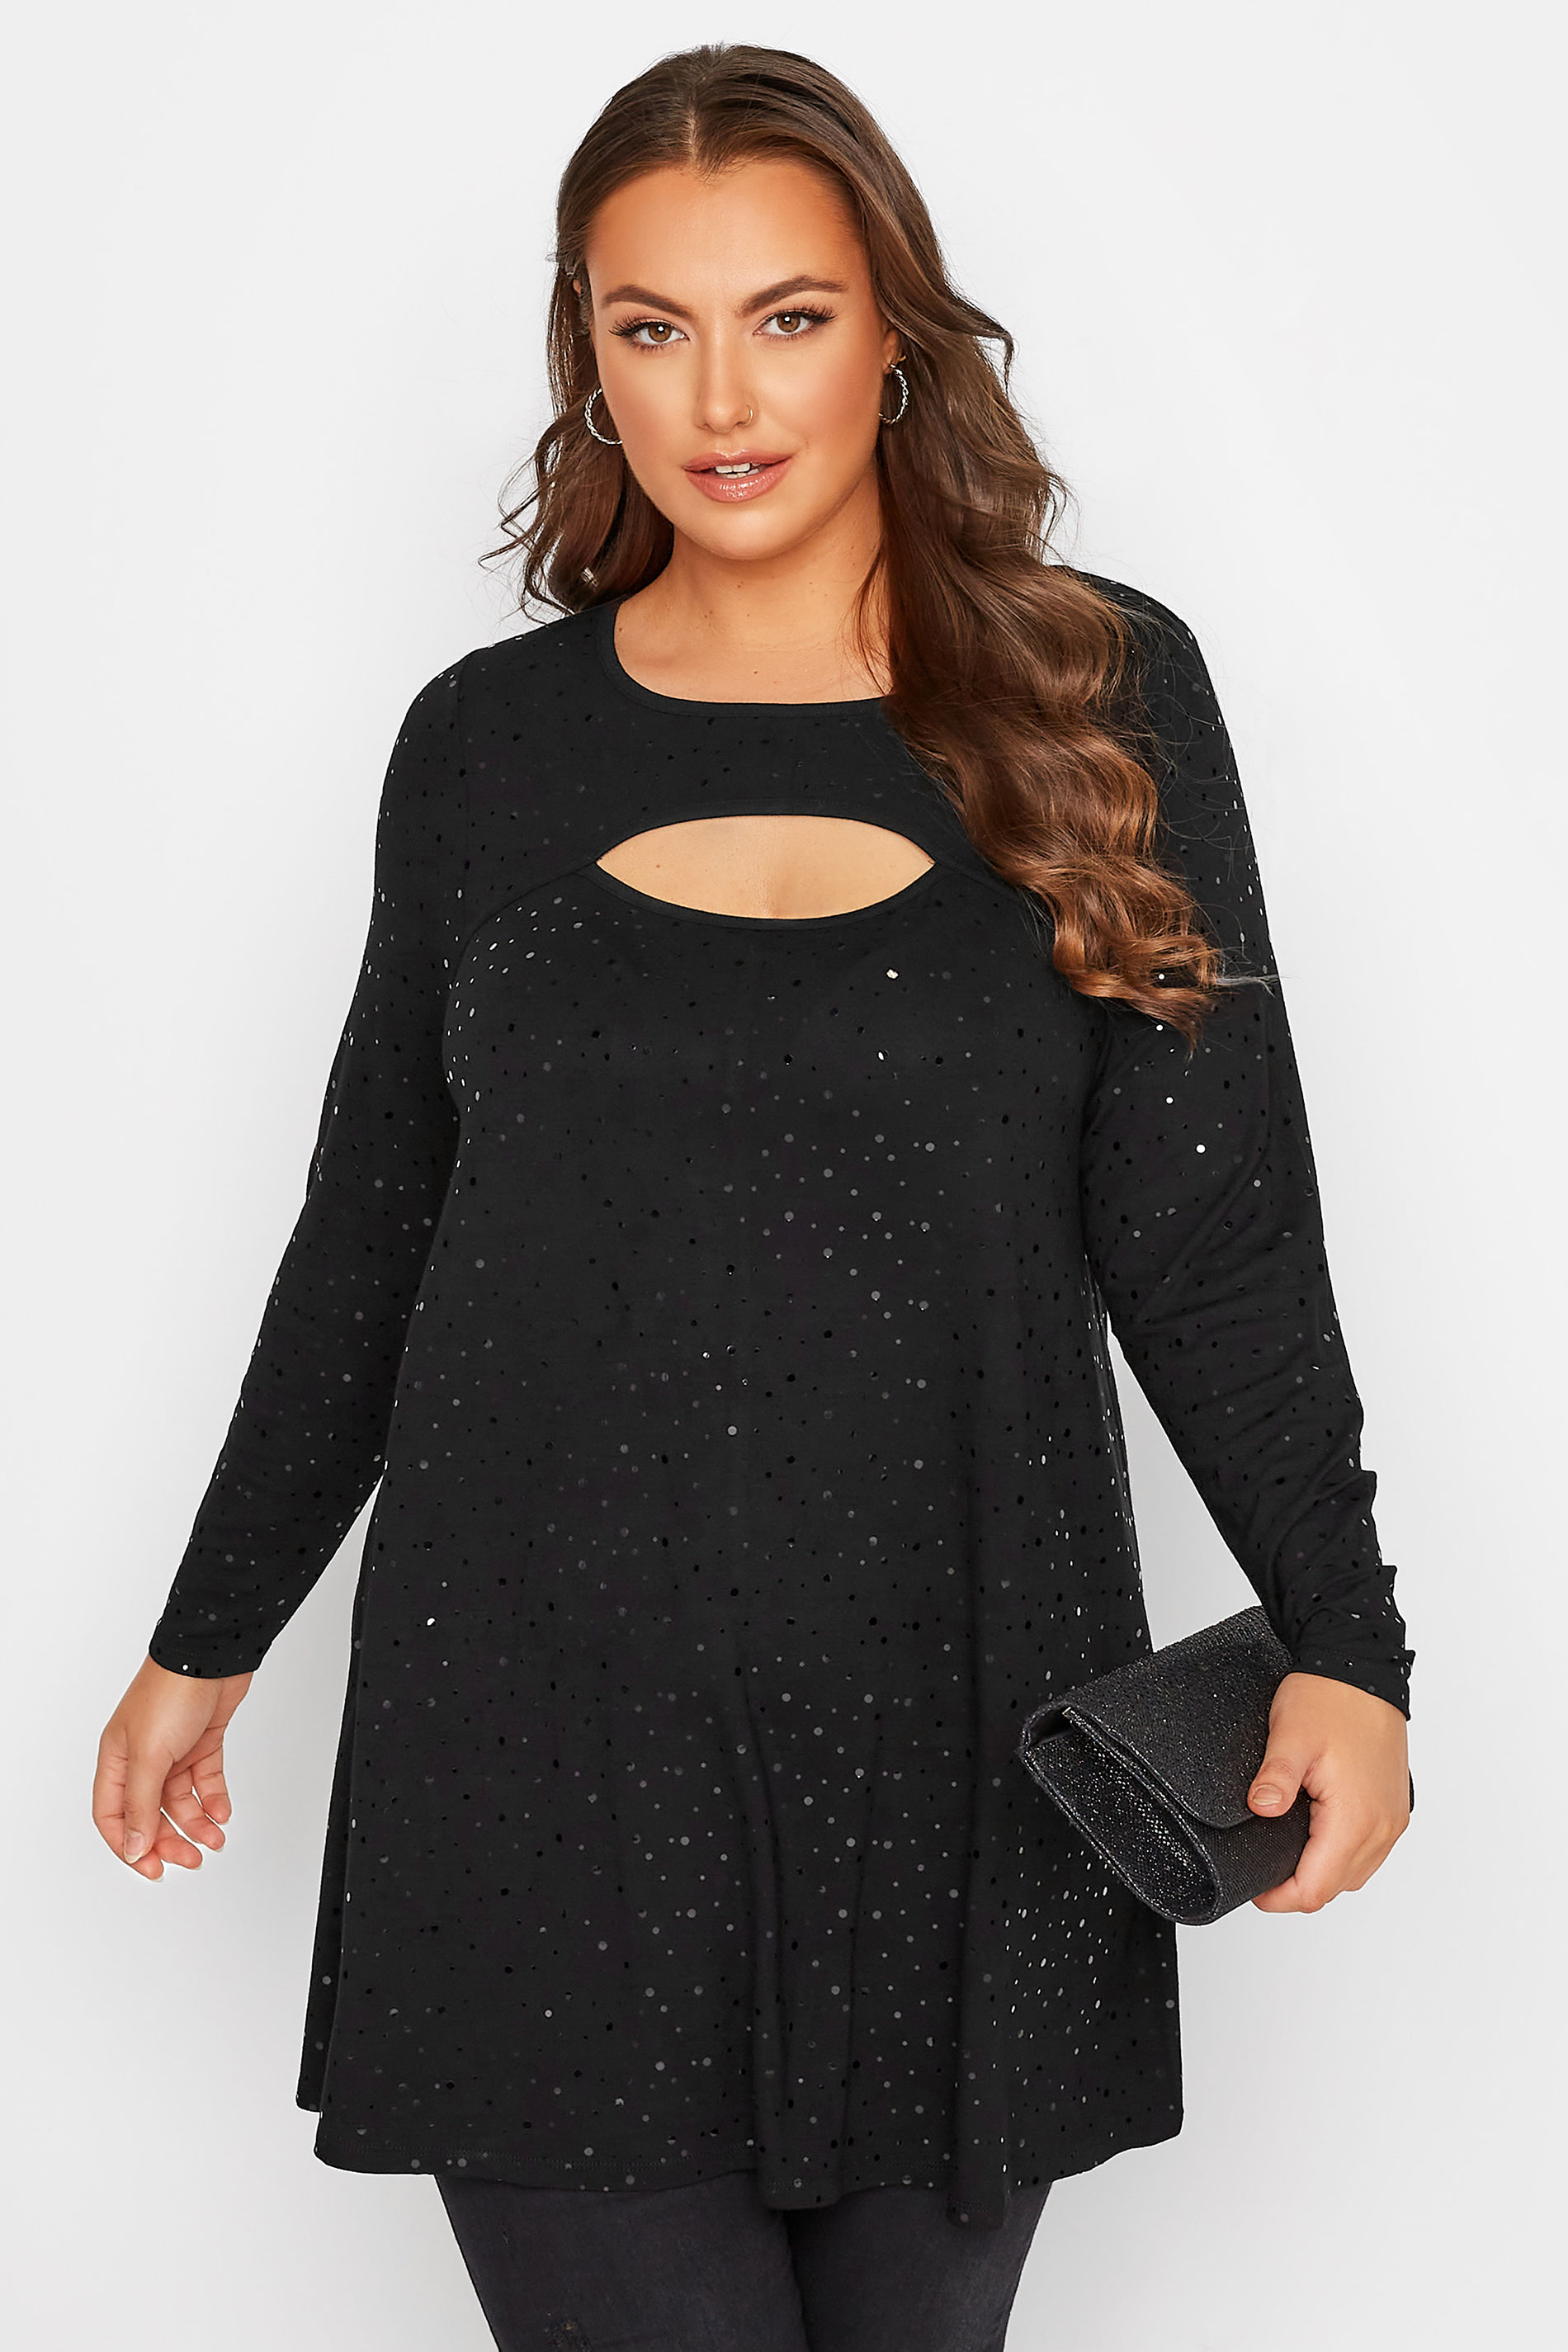 Plus Size Black Sequin Cut Out Swing Top | Yours Clothing 1